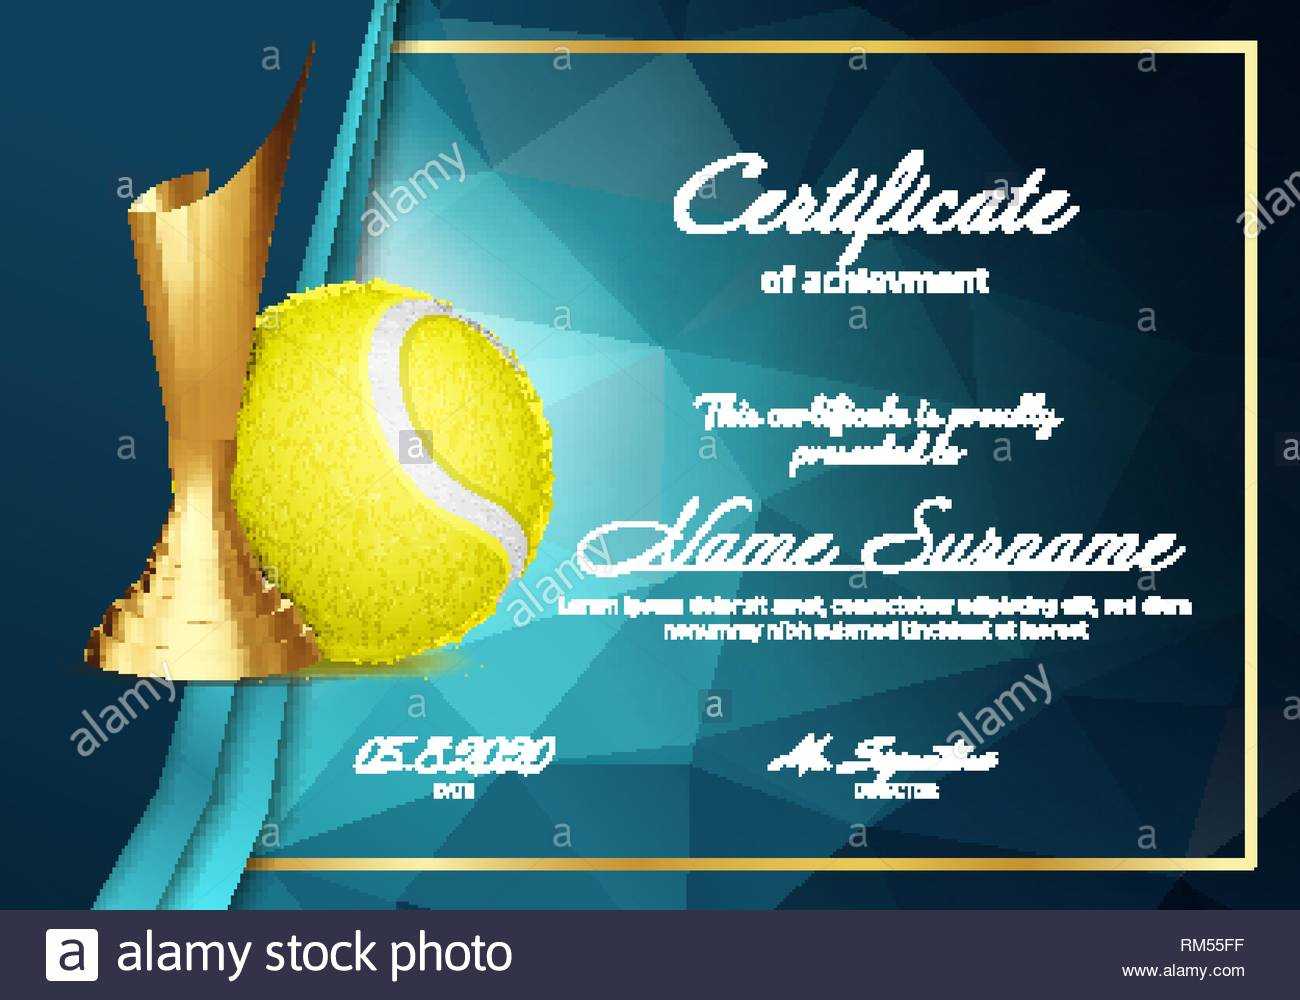 Tennis Certificate Diploma With Golden Cup Vector. Sport Pertaining To Tennis Gift Certificate Template